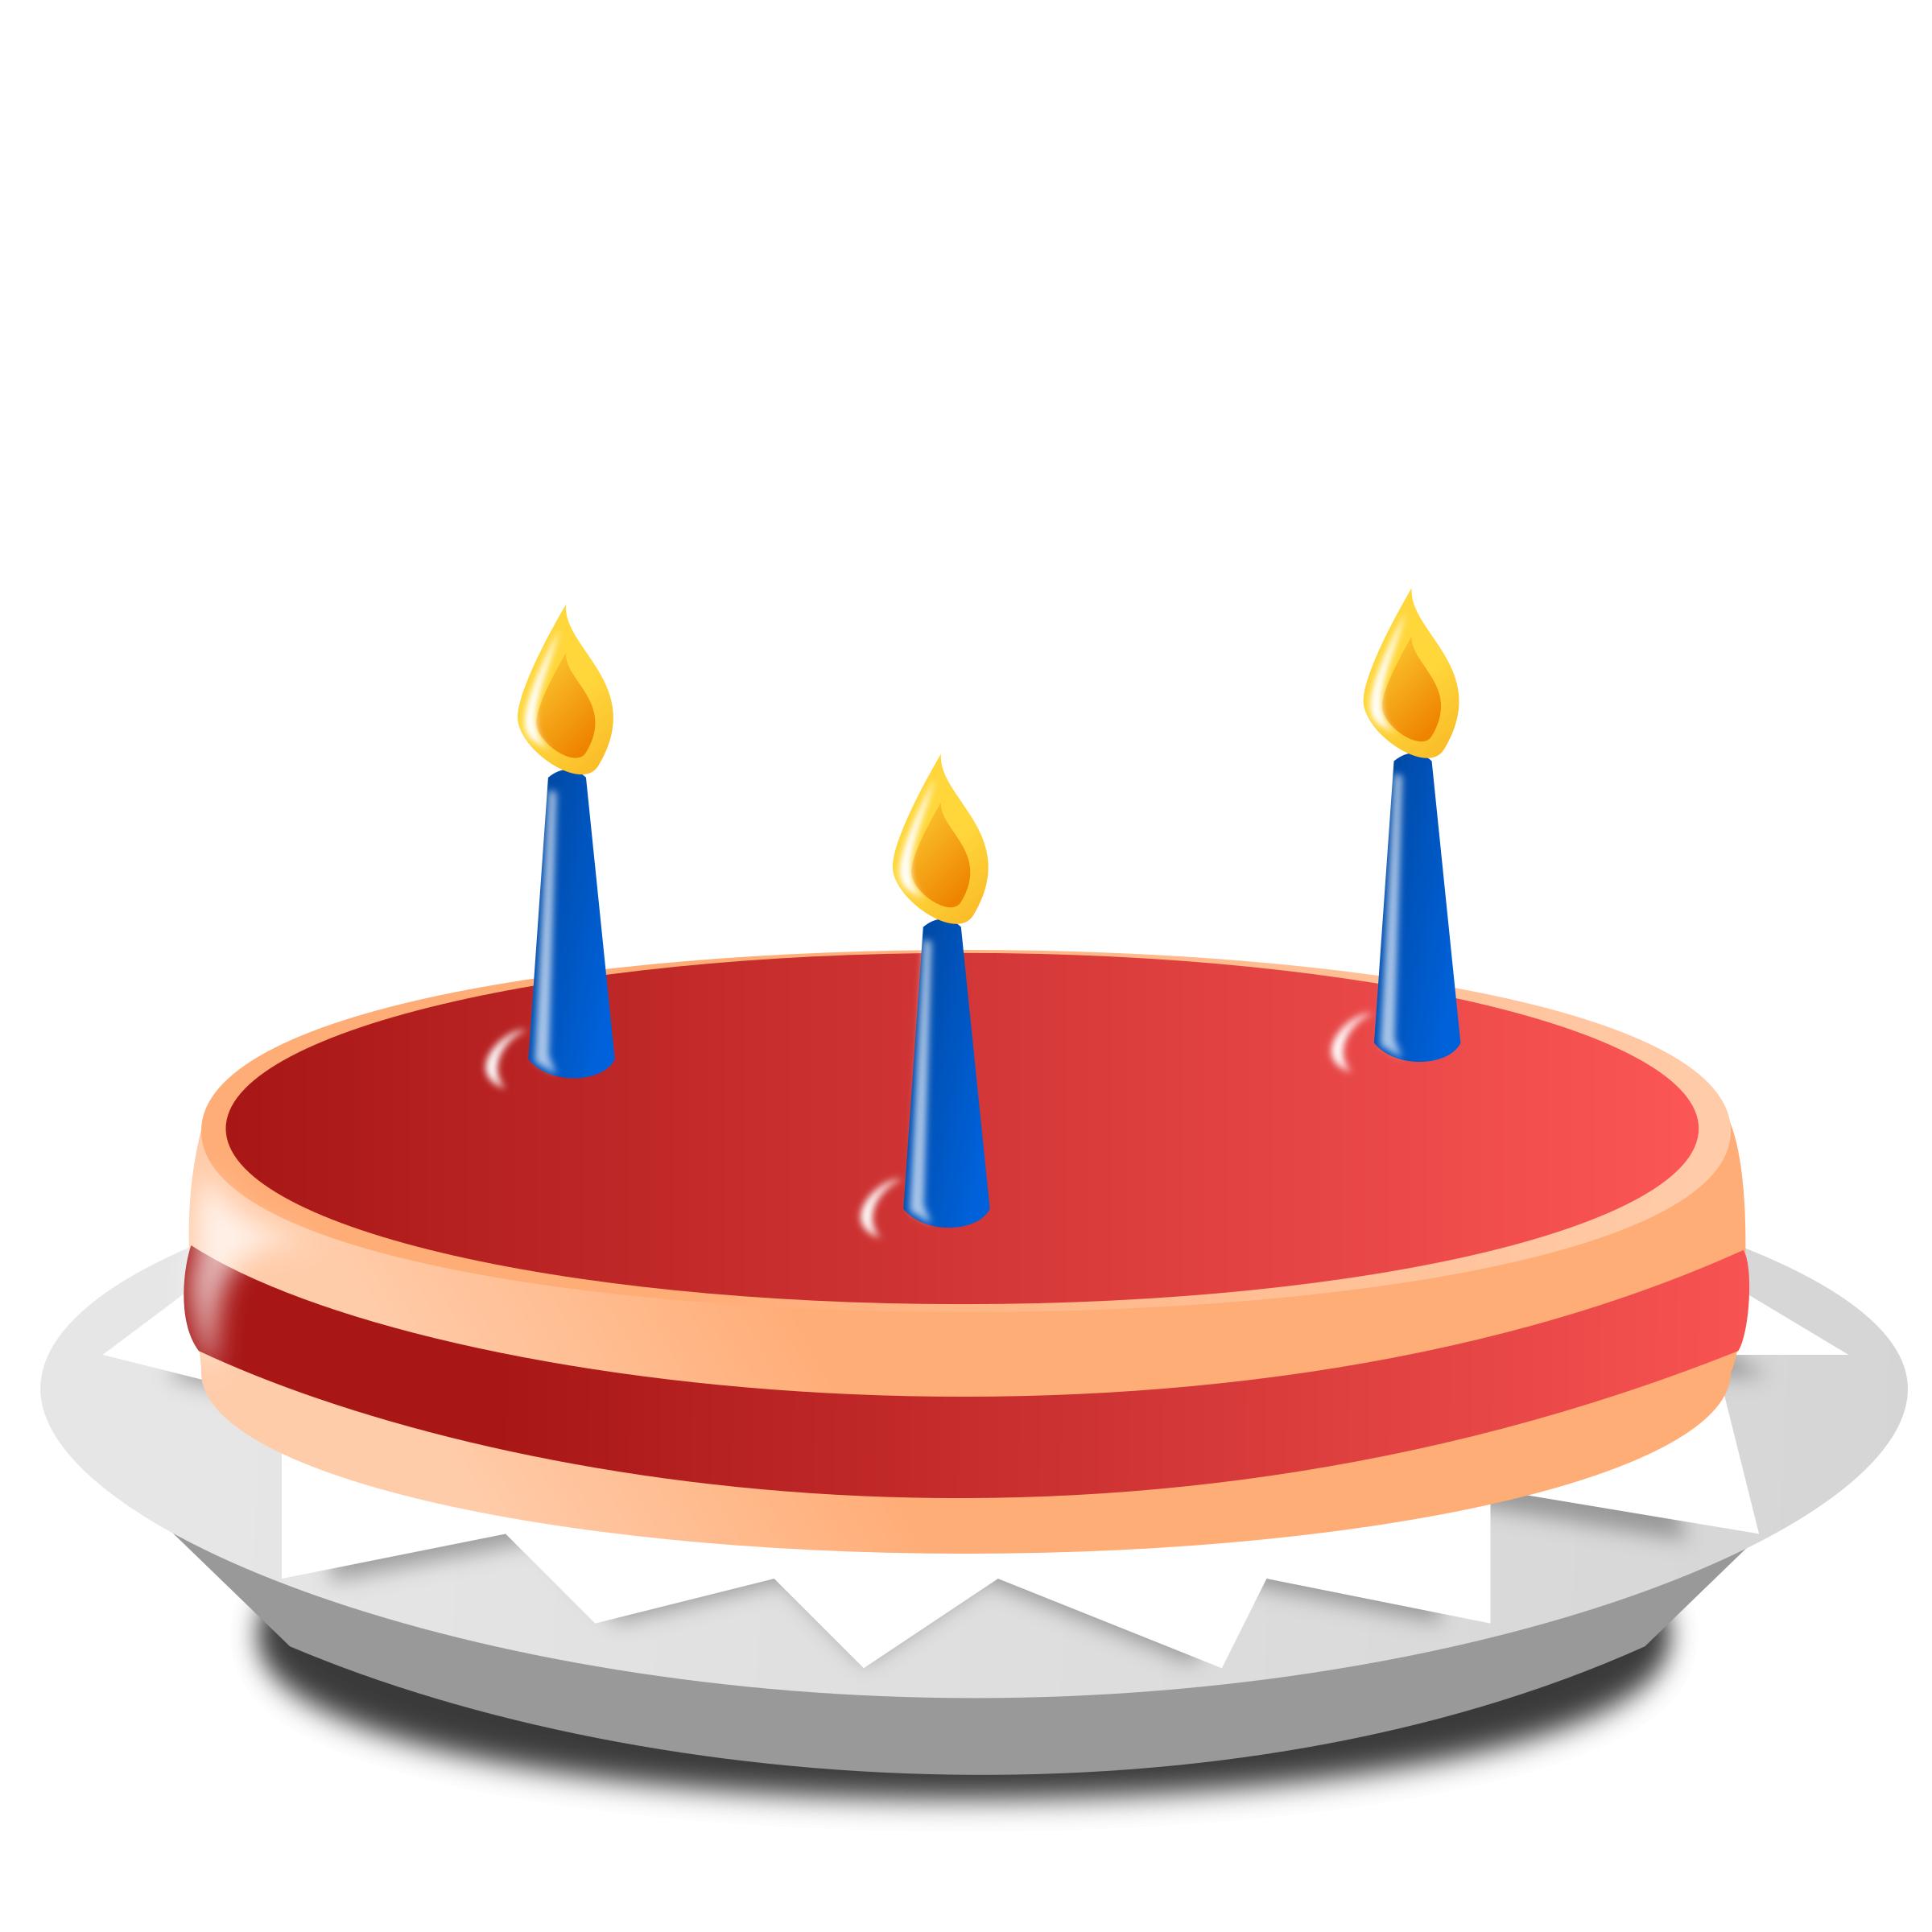 3 Candle Cake png